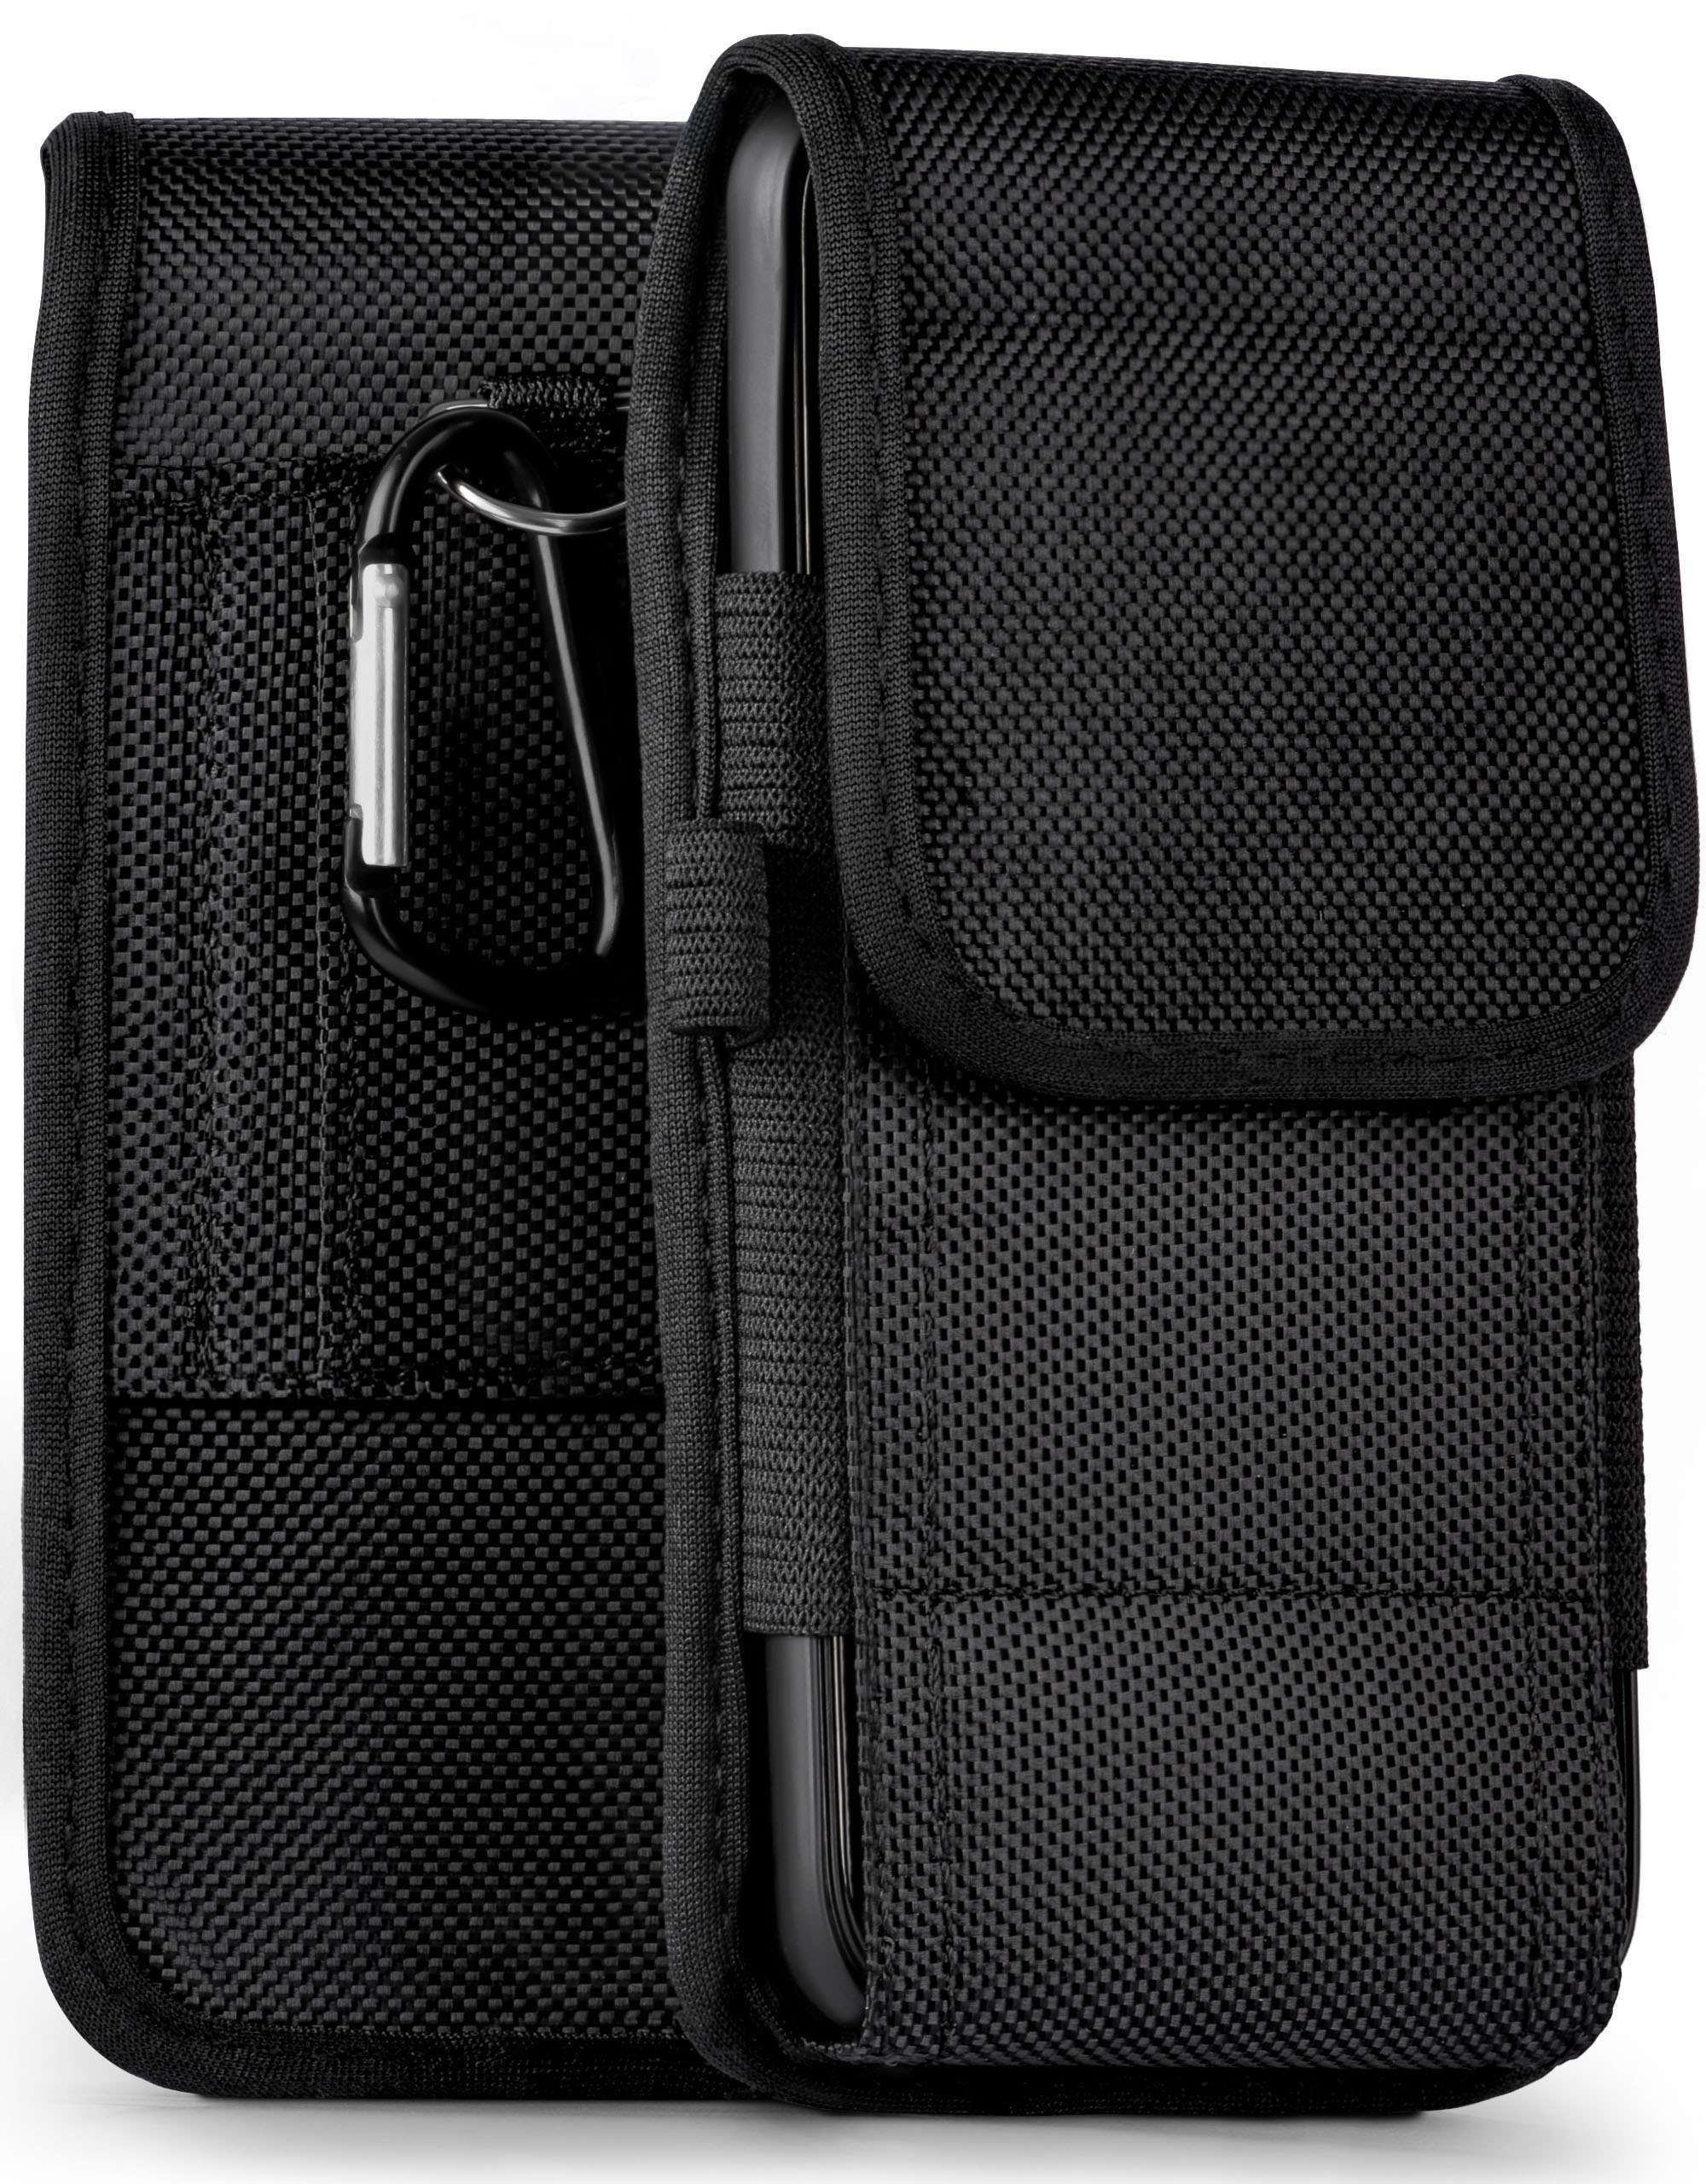 Trail C5 Neffos Max, Case, Holster, MOEX Agility TP-Link,